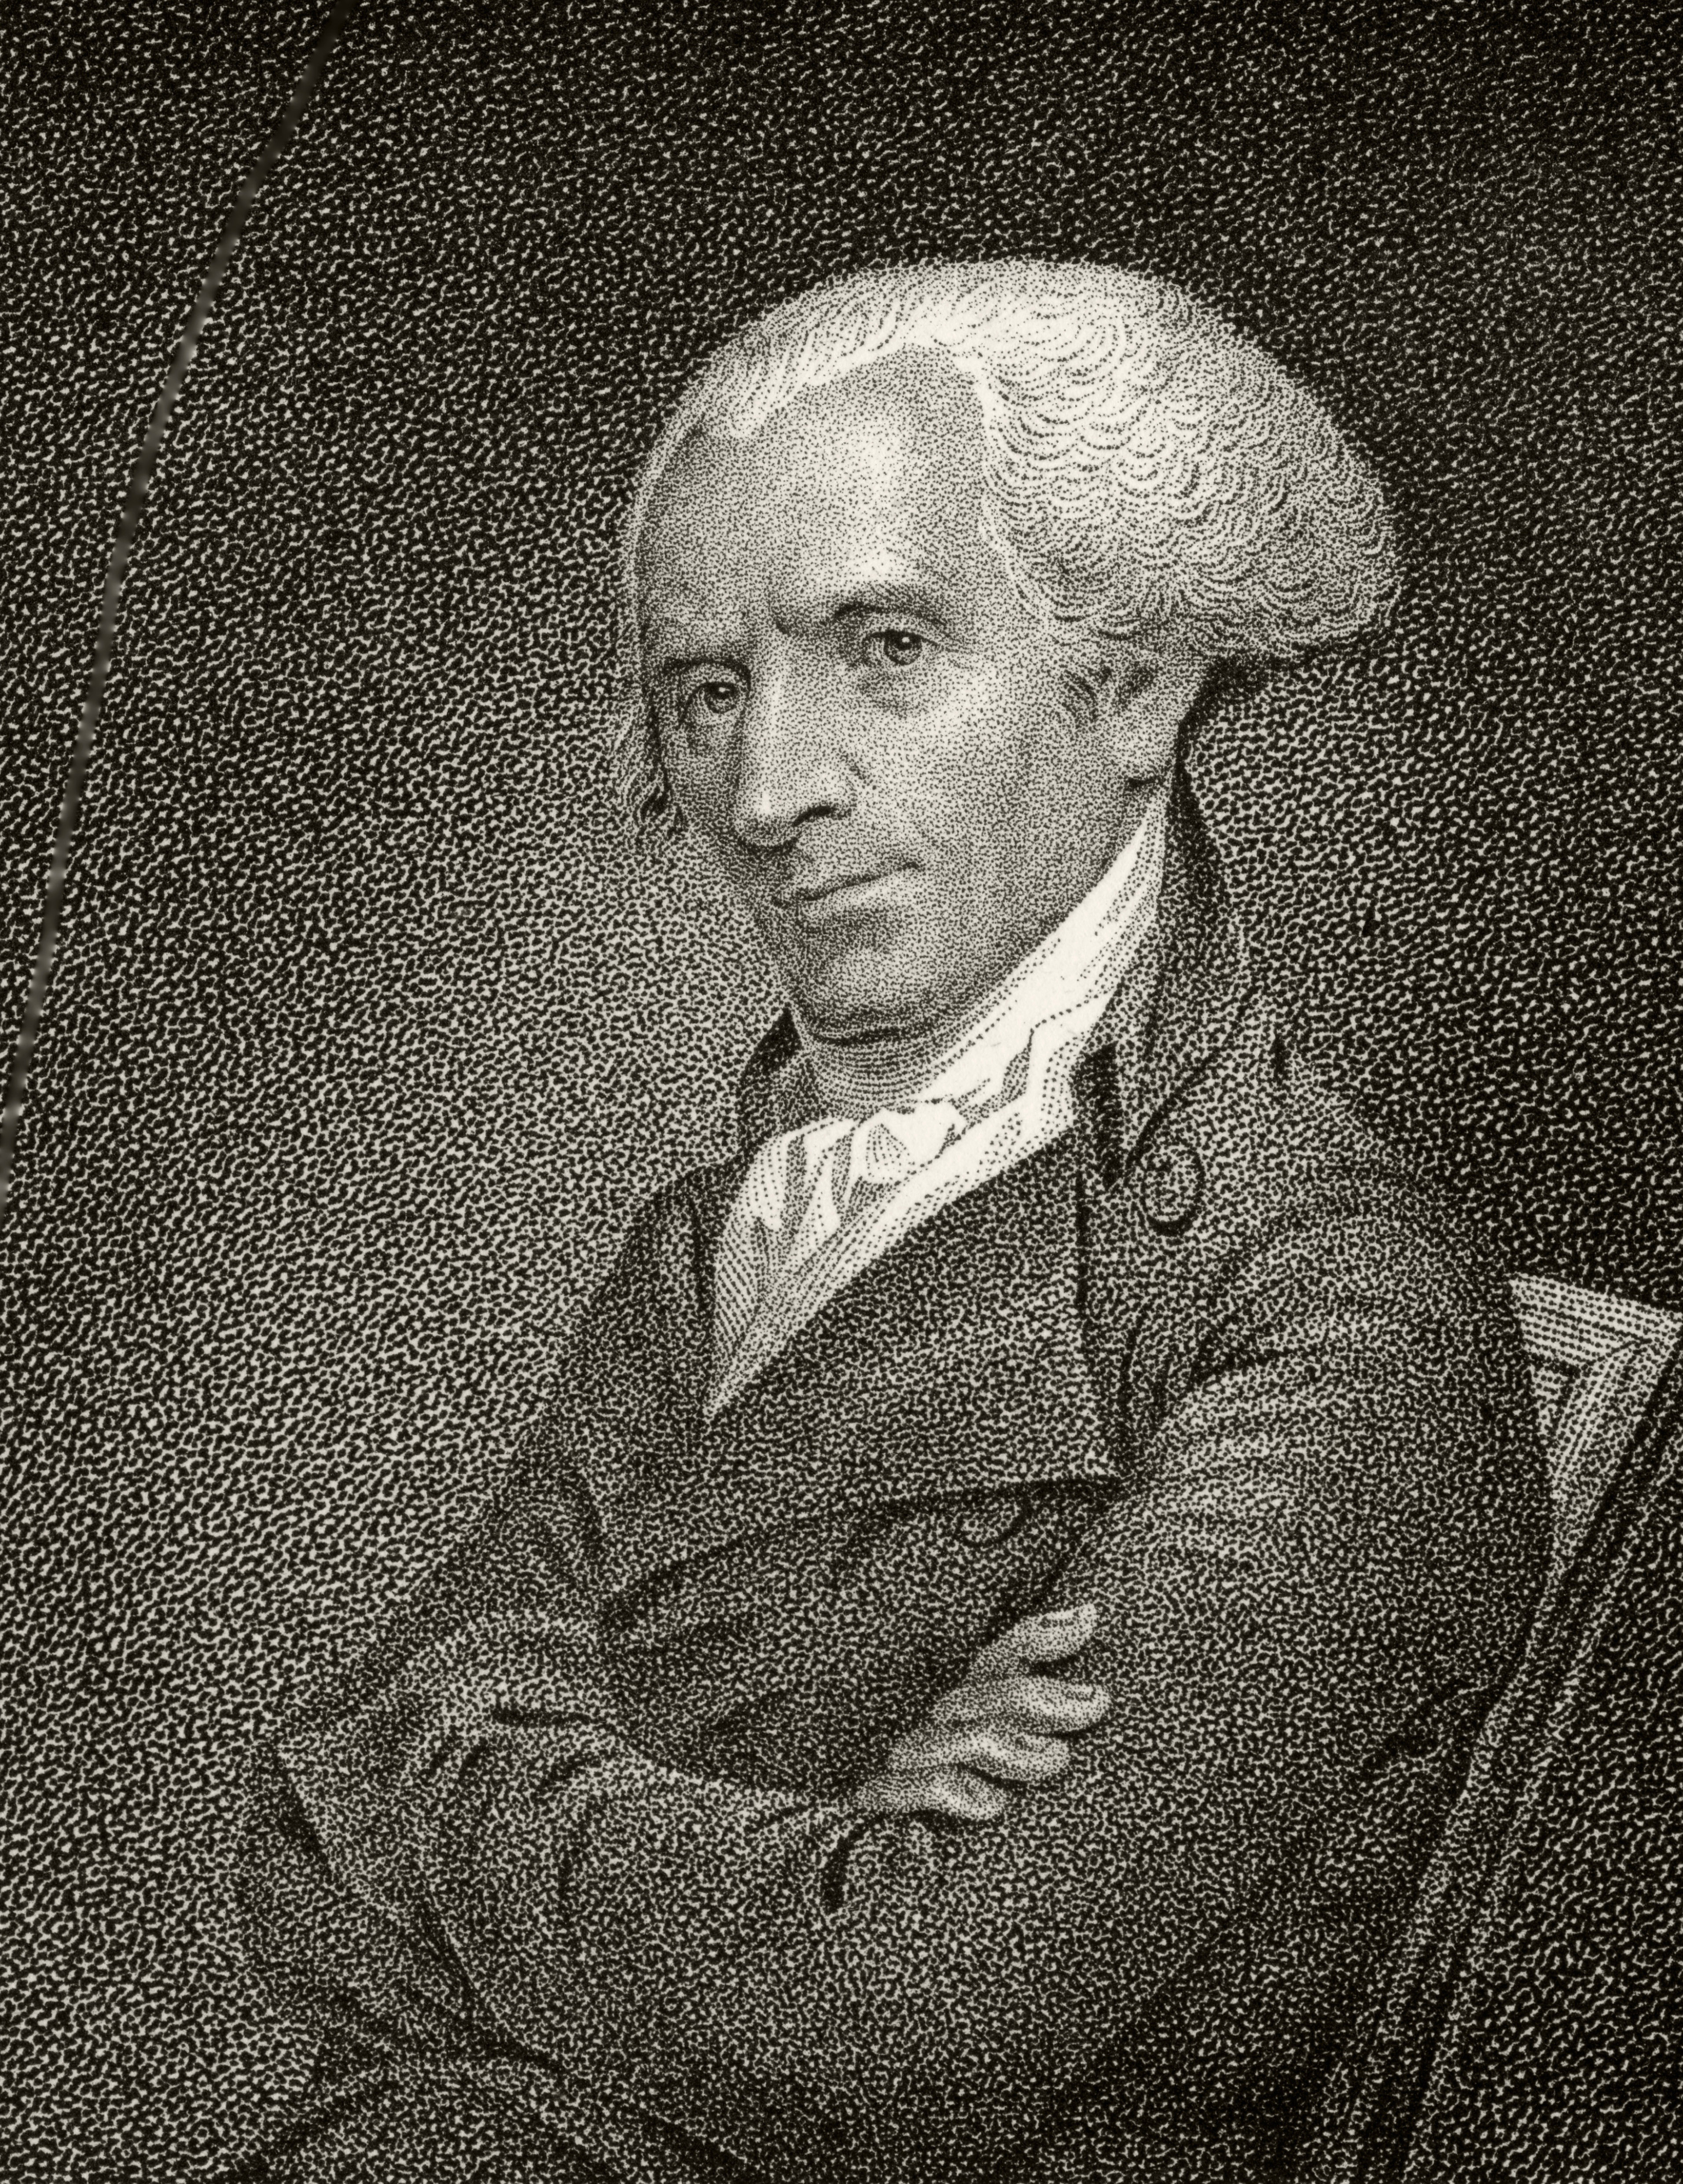 Elbridge Gerry, a signatory of the Declaration of Independence and the "father" of gerrymandering. (Universal History Archive—Getty Images)